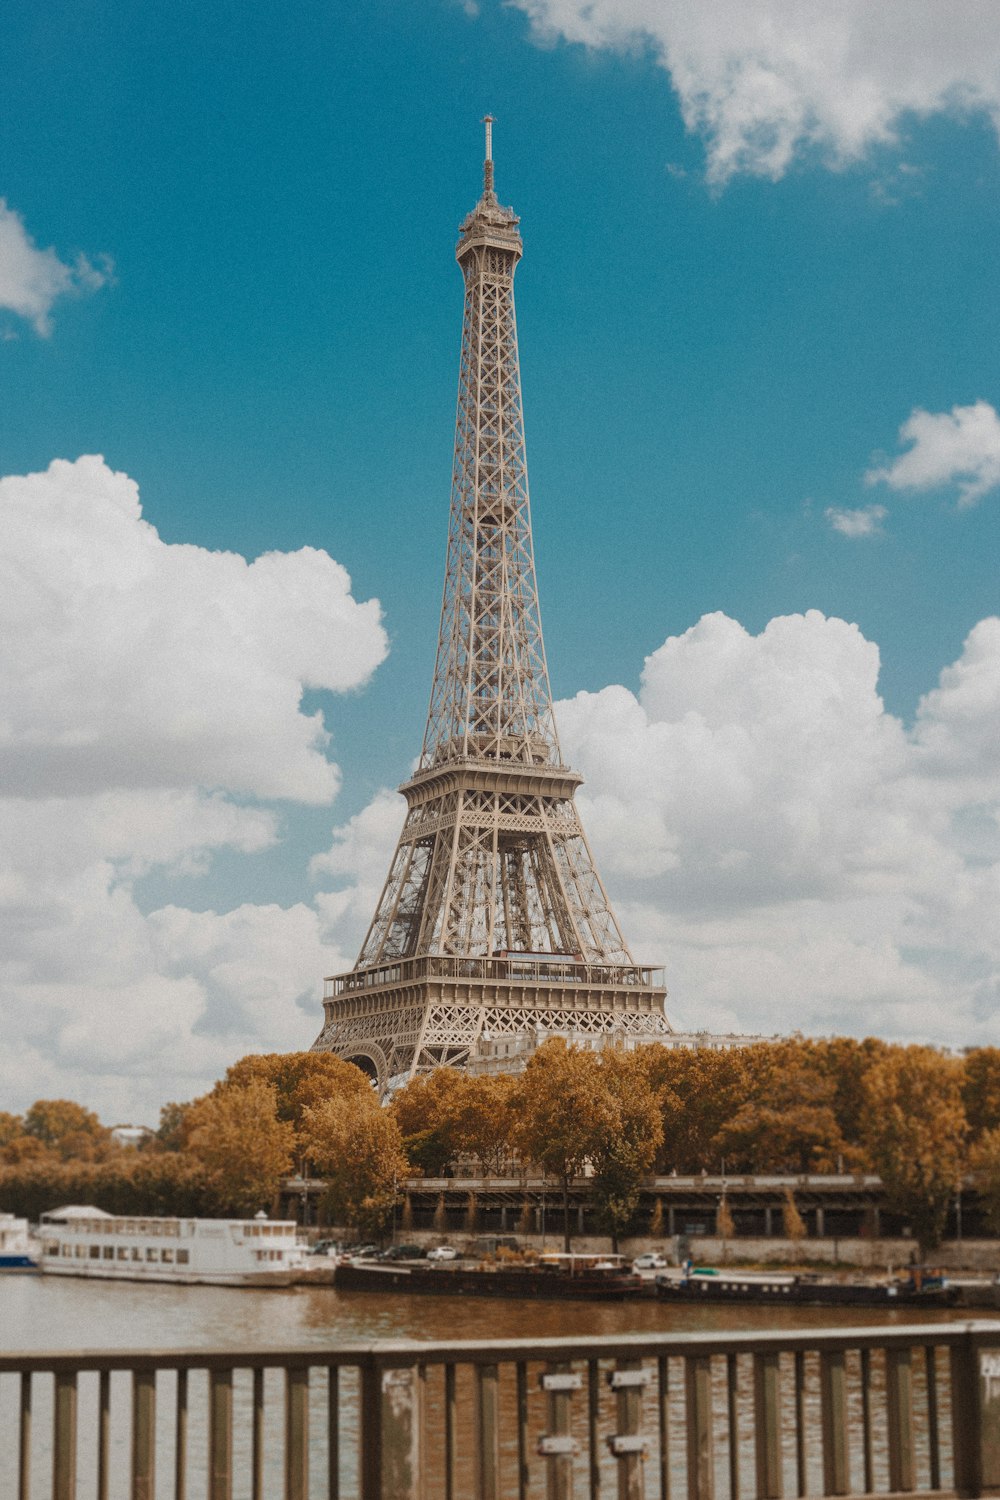 a view of the eiffel tower from across the river